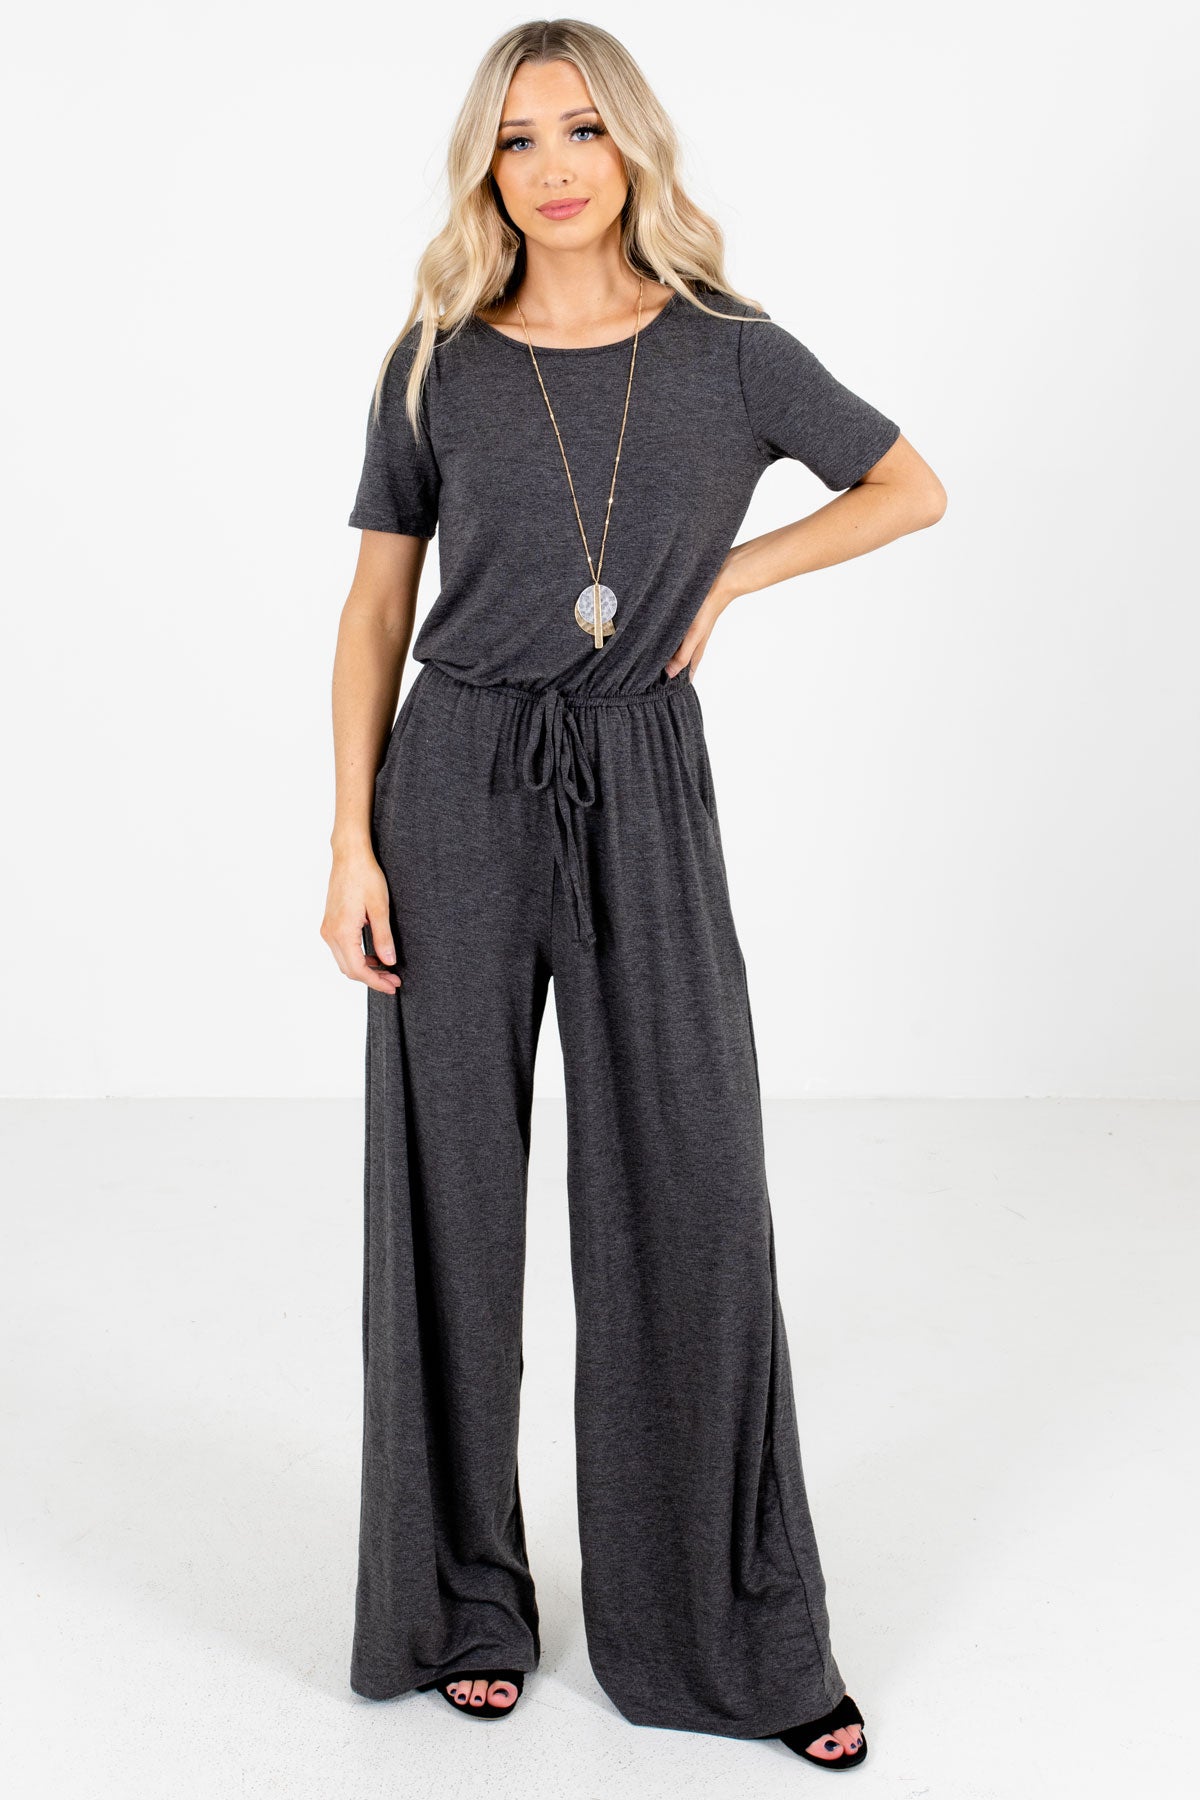 Charcoal Gray Drawstring Waistband Boutique Jumpsuits for Women